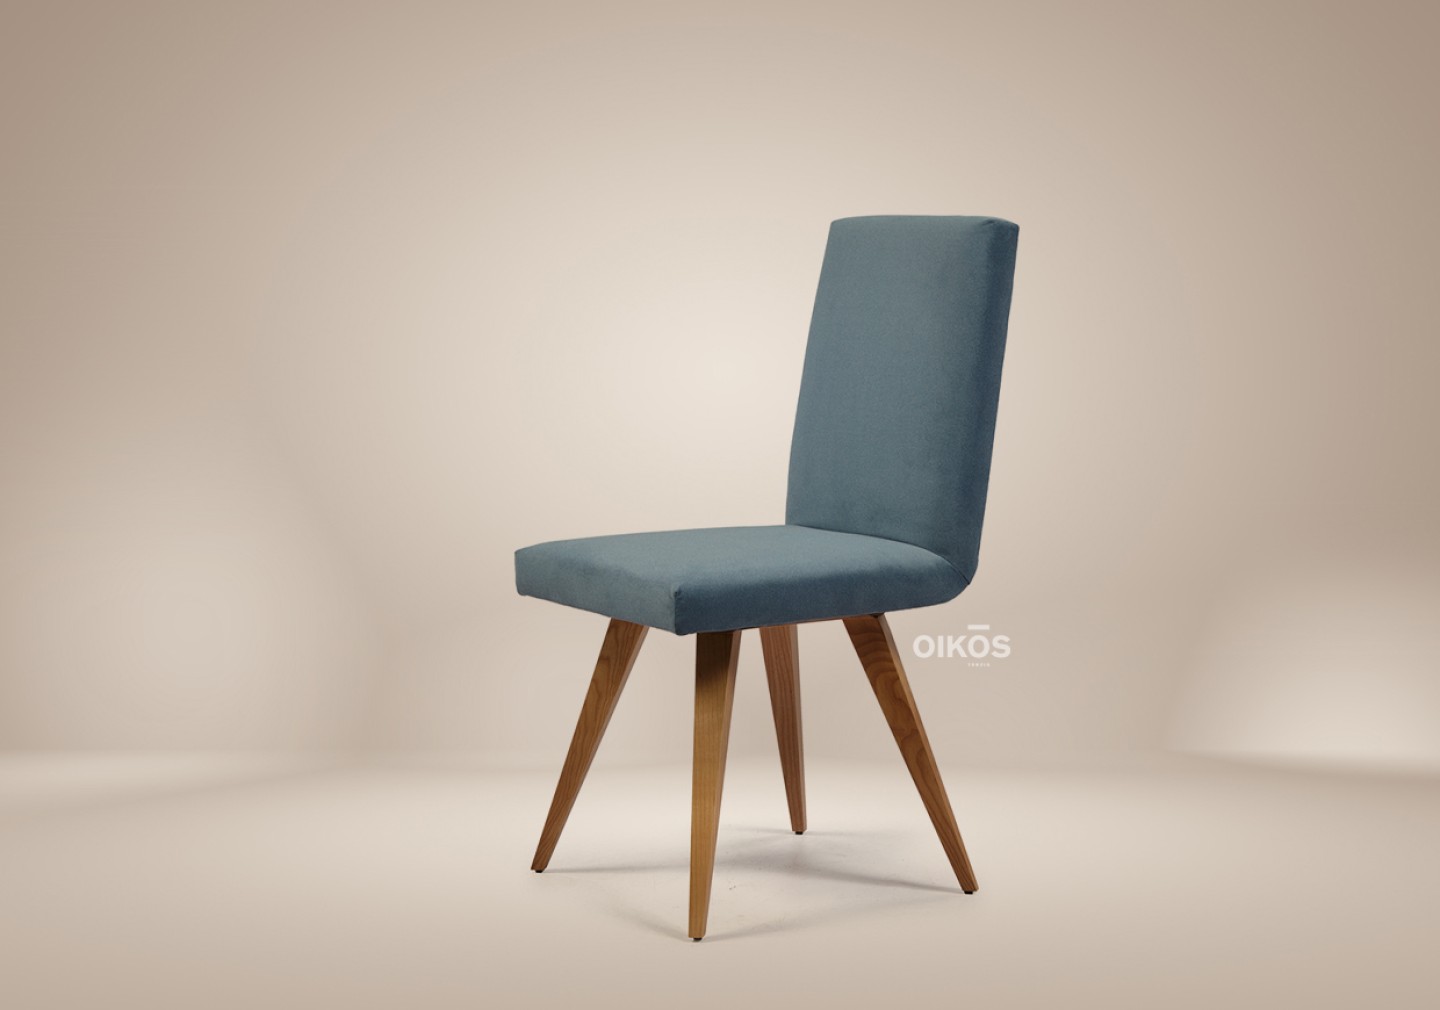 THE LAGOON DINING CHAIR